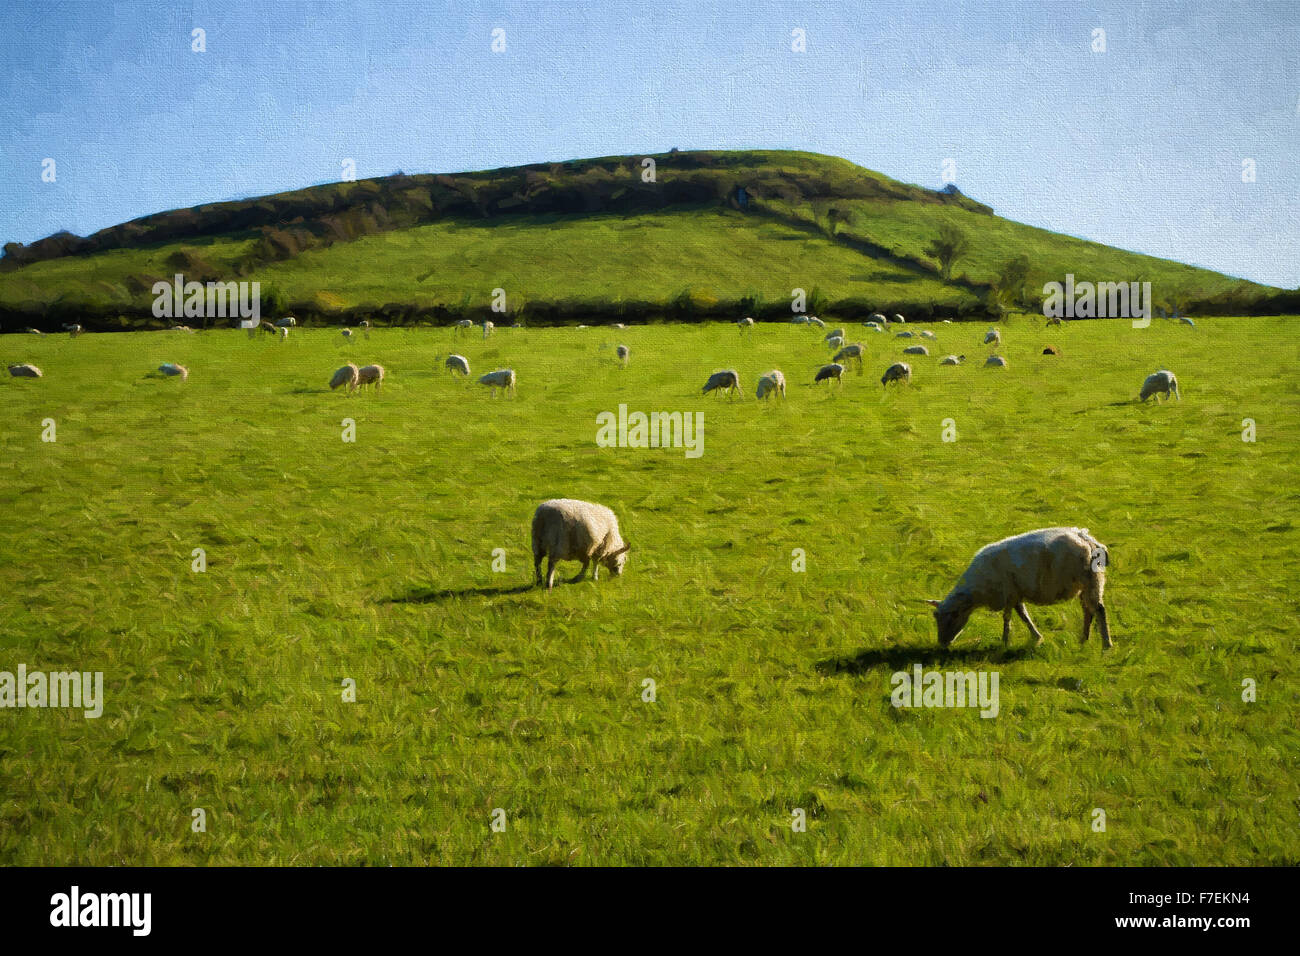 Somerset countryside view with sheep grazing Brent Knoll near Weston-super-Mare England UK illustration like oil painting Stock Photo